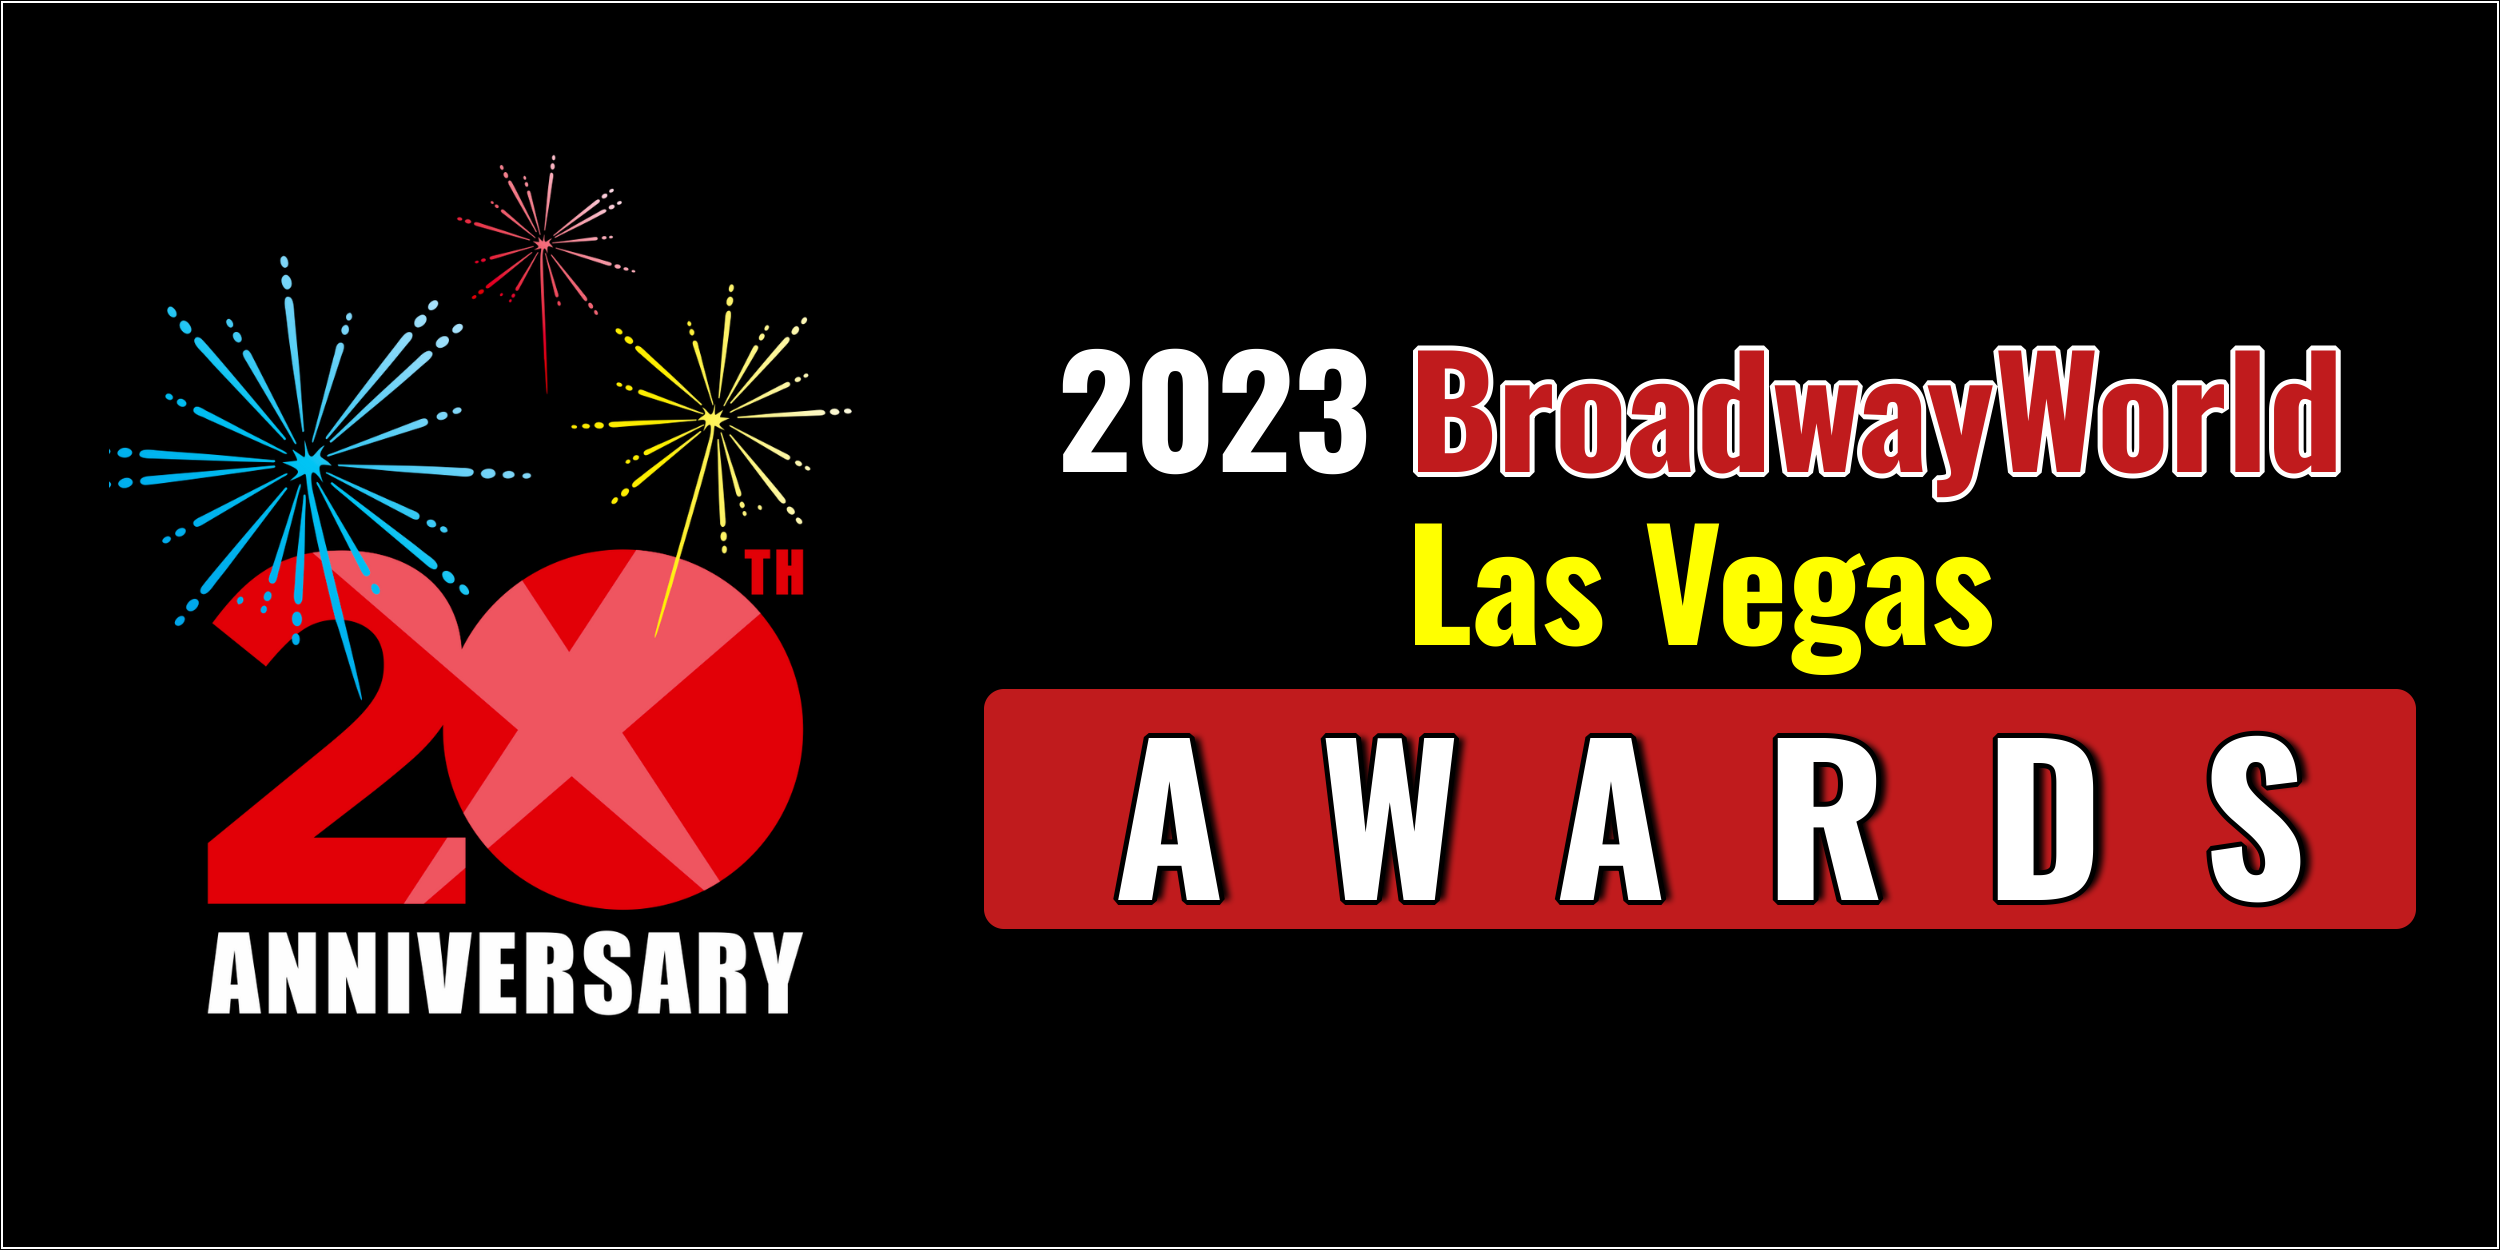 Latest Standings Announced For The 2023 BroadwayWorld Las Vegas Awards; INHERIT THE WIND Leads Best Play! 